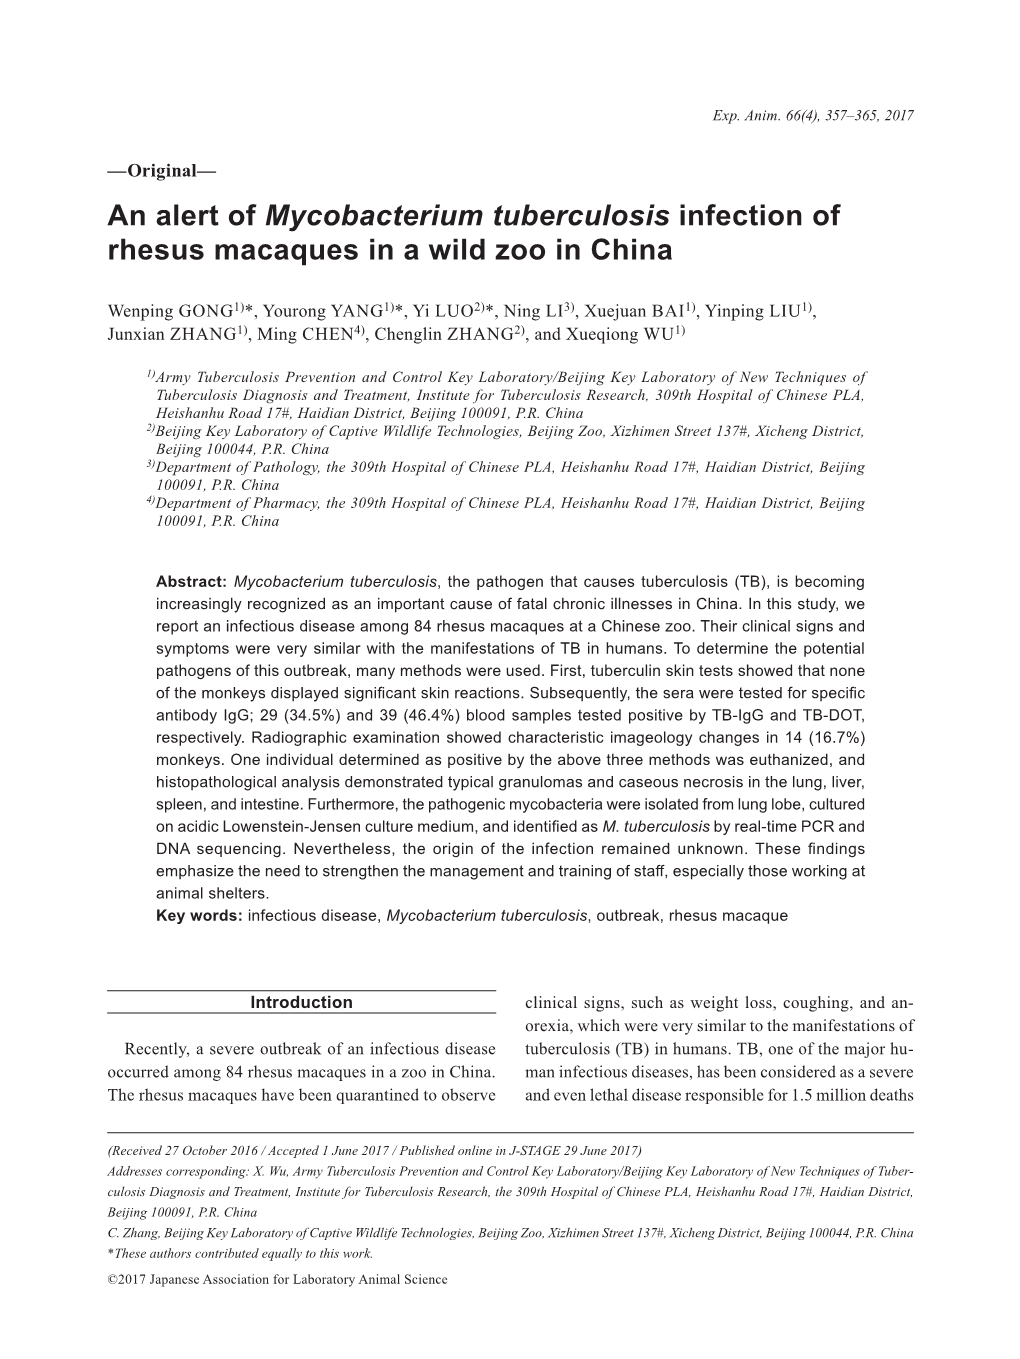 An Alert of Mycobacterium Tuberculosis Infection of Rhesus Macaques in a Wild Zoo in China